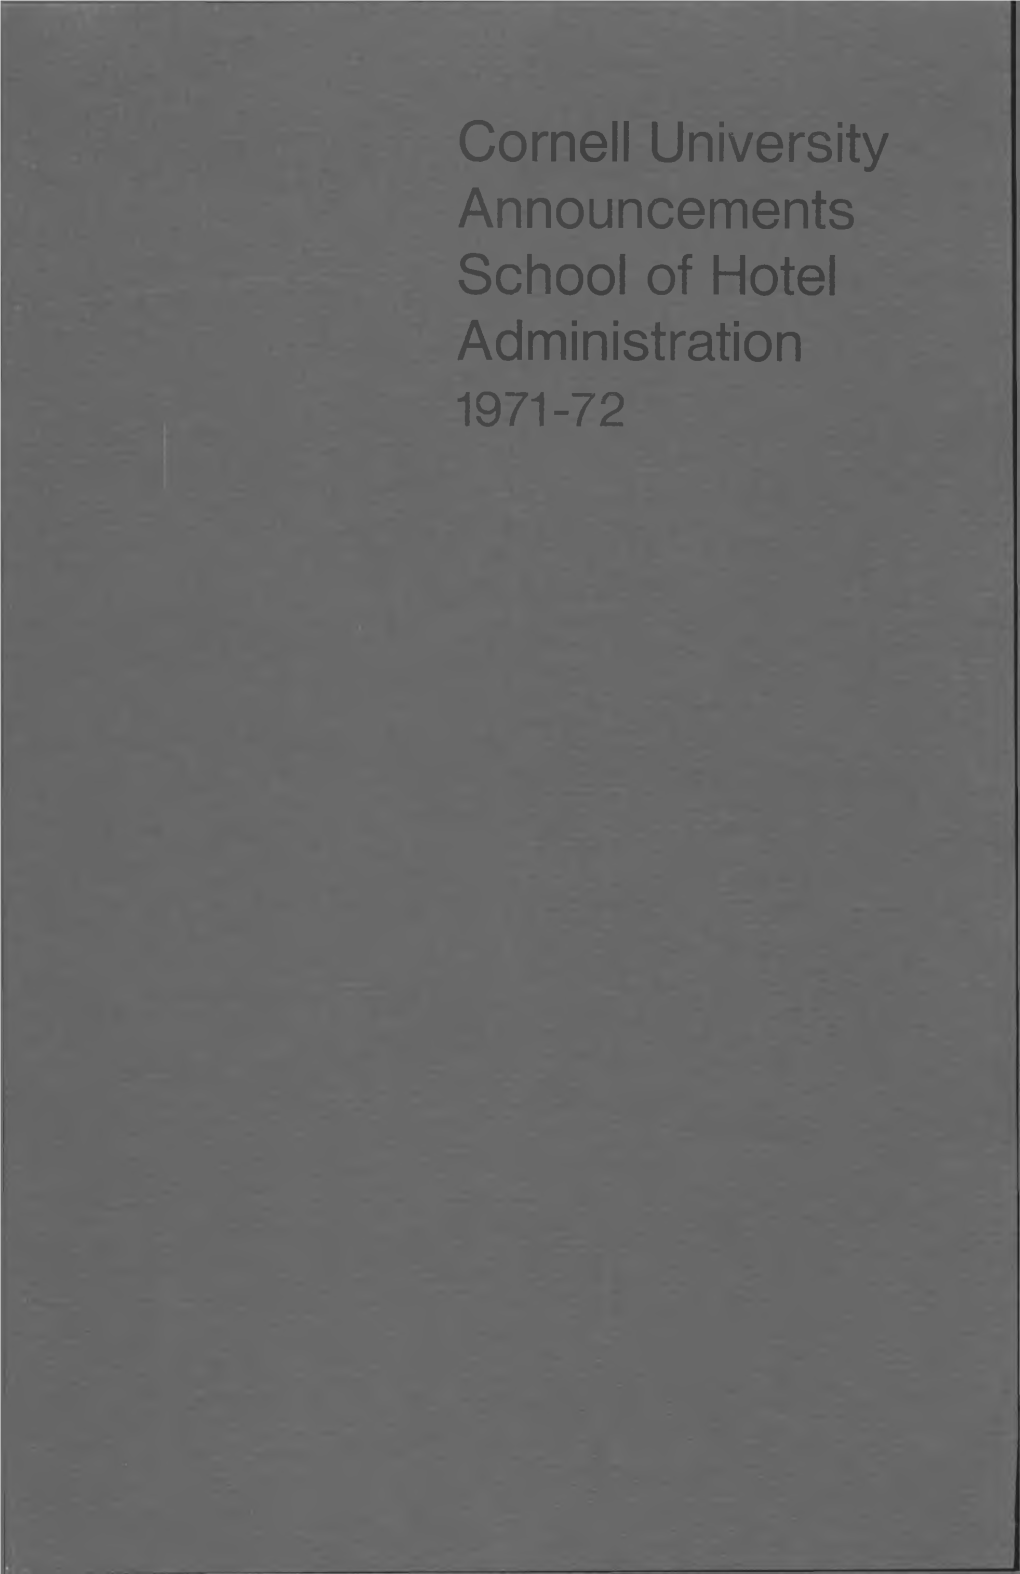 Cornell University Announcements School of Hotel Administration 1971-72